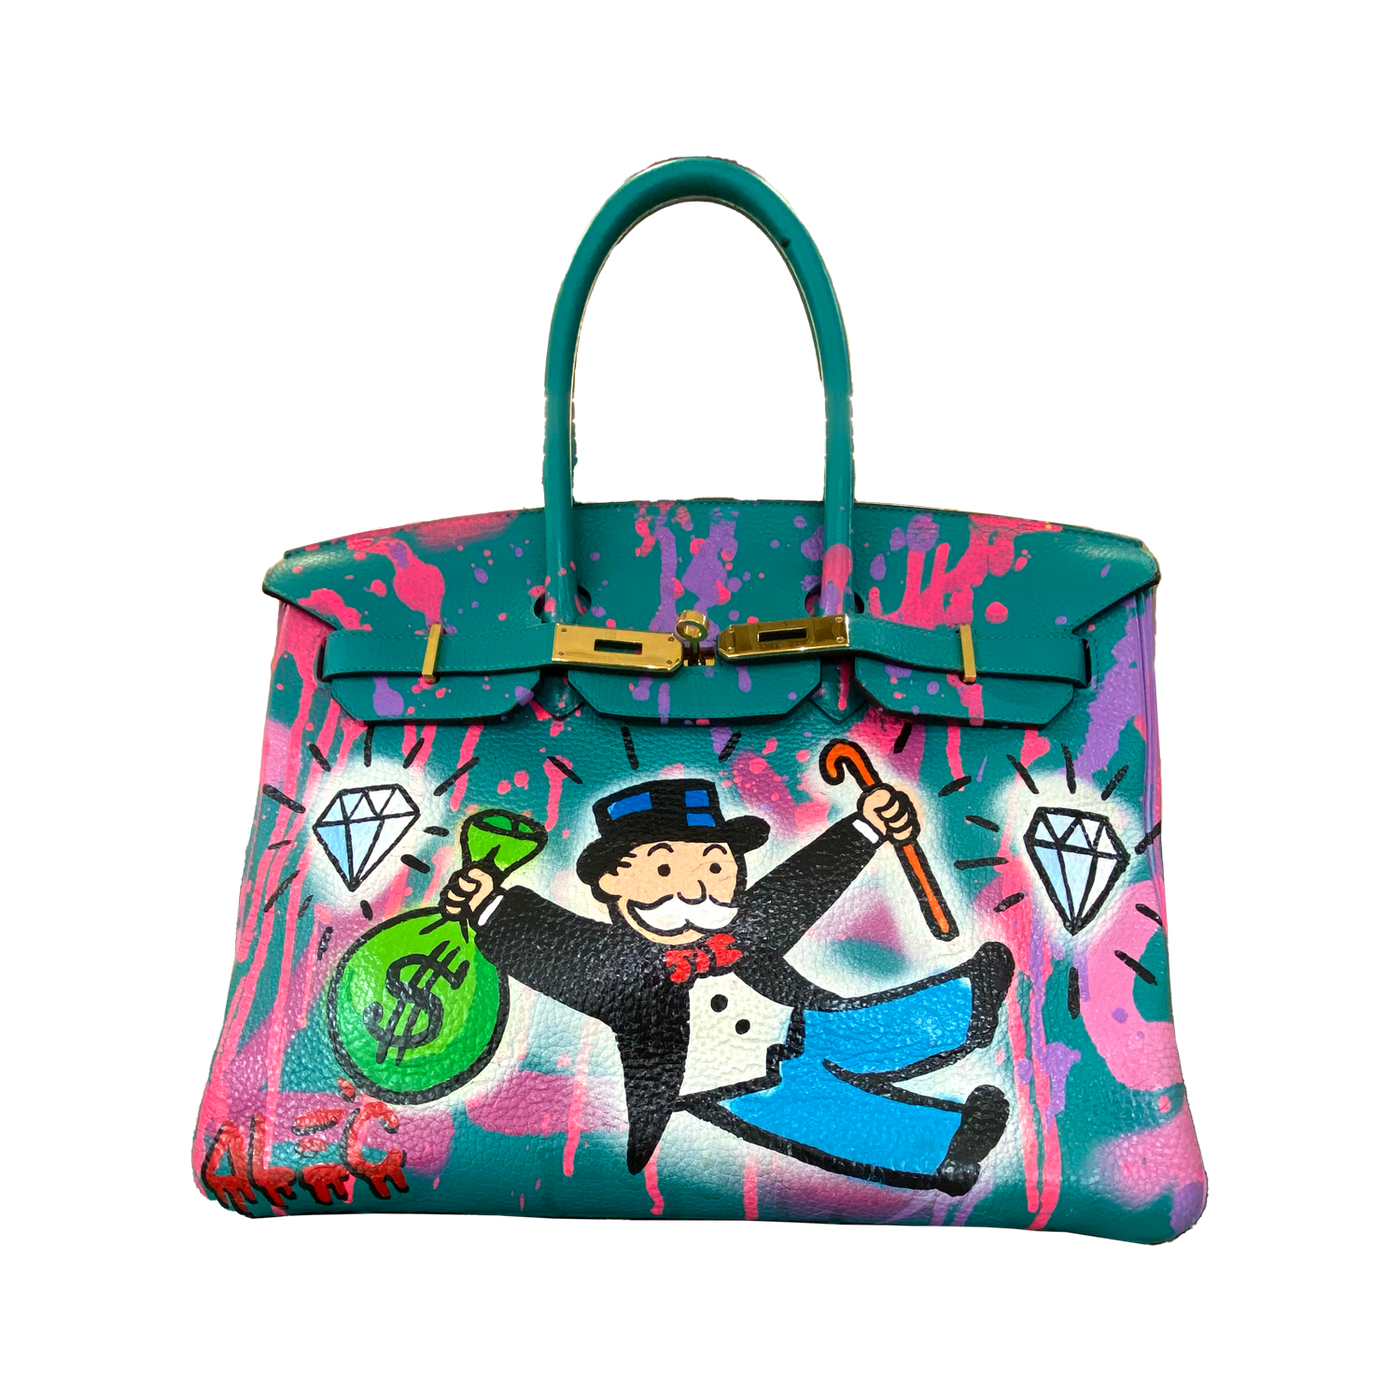 Alec Monopoly Masterpiece Hermes Birkin 35 #byappointmentuae  #personalshopper #alecmonopoly, By By Appointment UAE